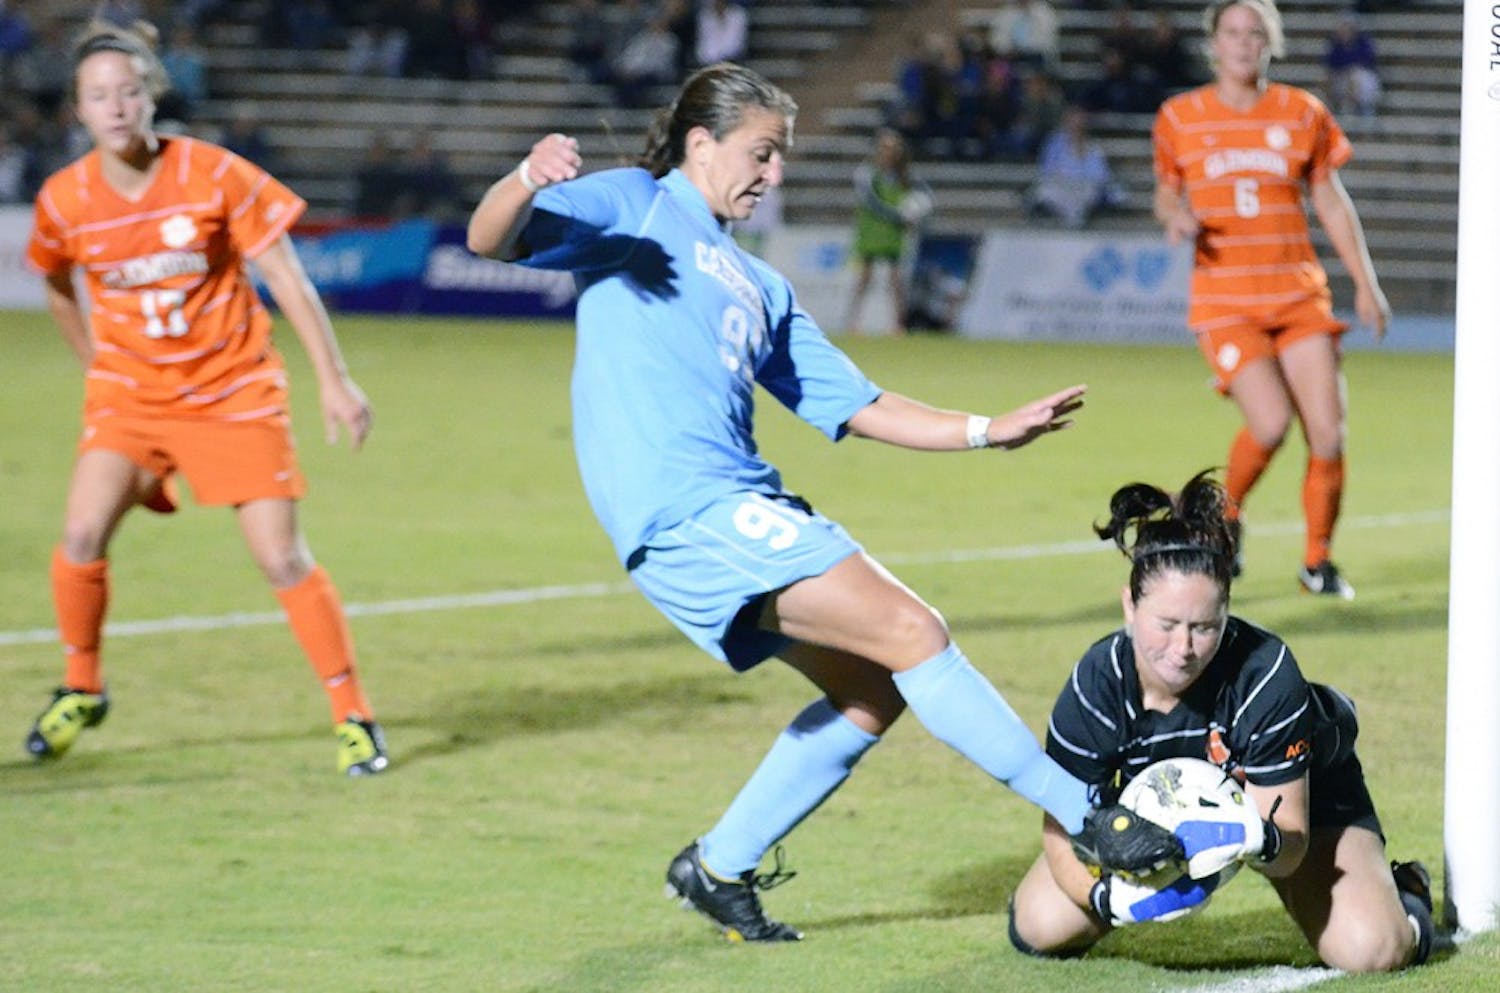 Photo: UNC women's soccer midfielder back in action after injuries (Kevin Minogue)